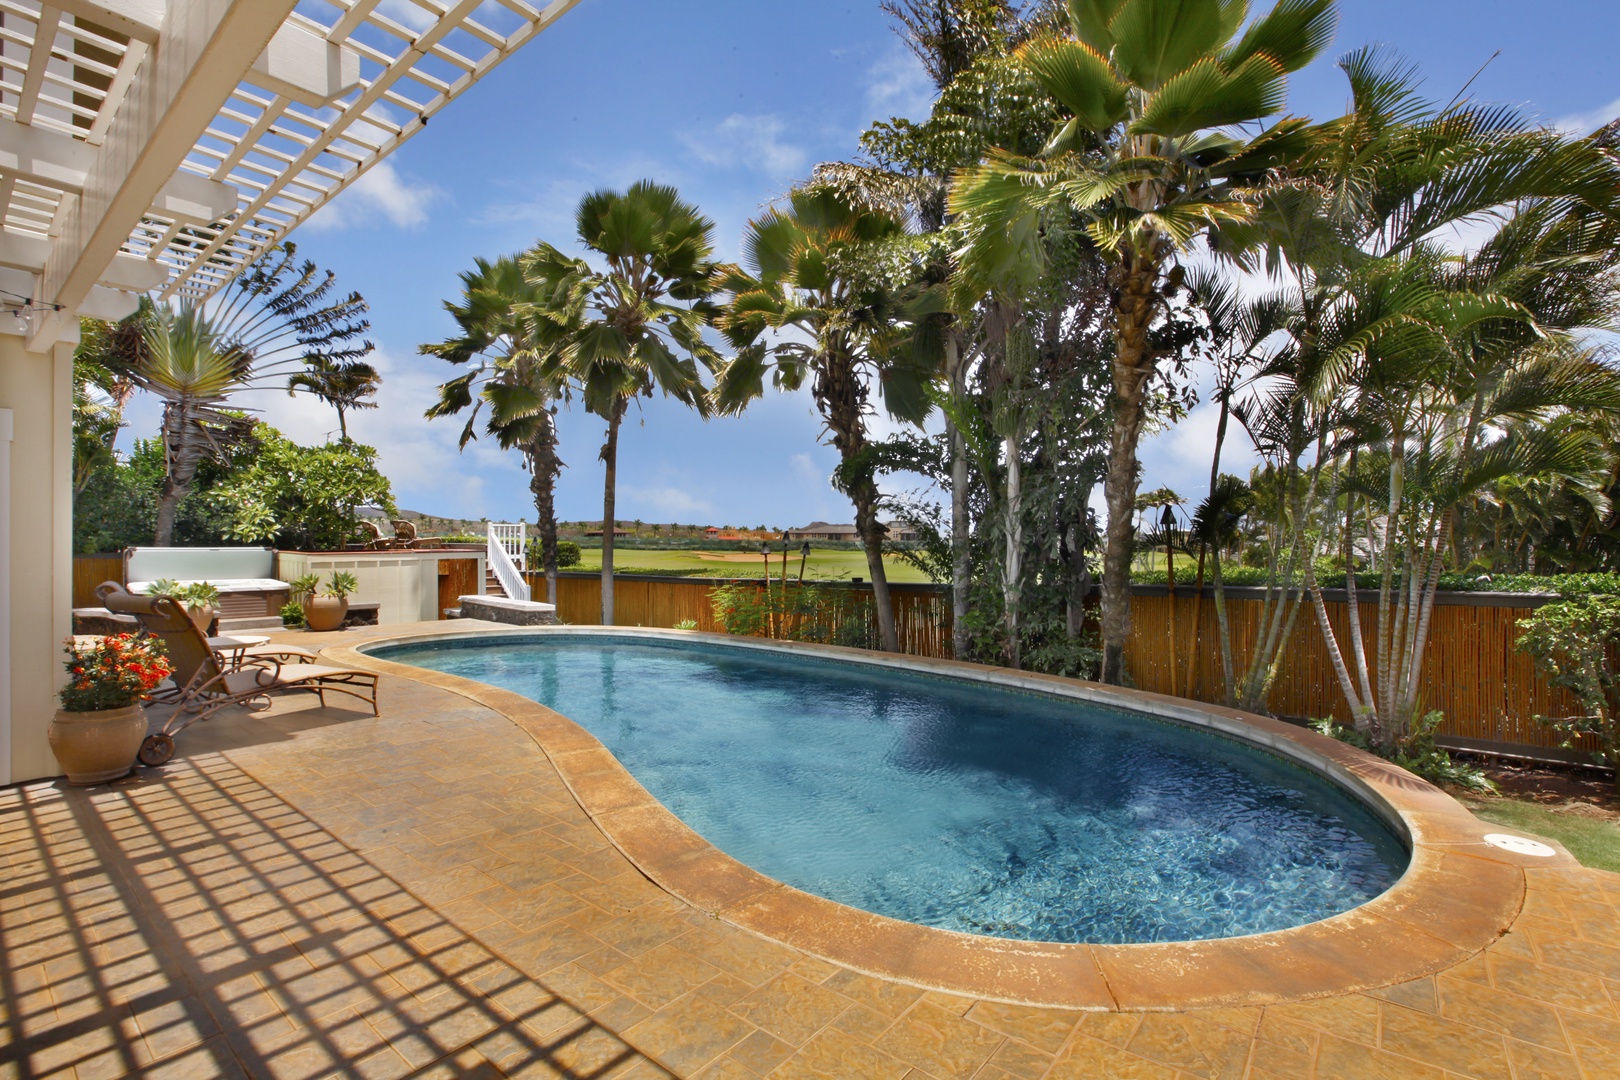 Koloa Vacation Rentals, Plantation Cottage at Poipu - backyard with pool and golf course view